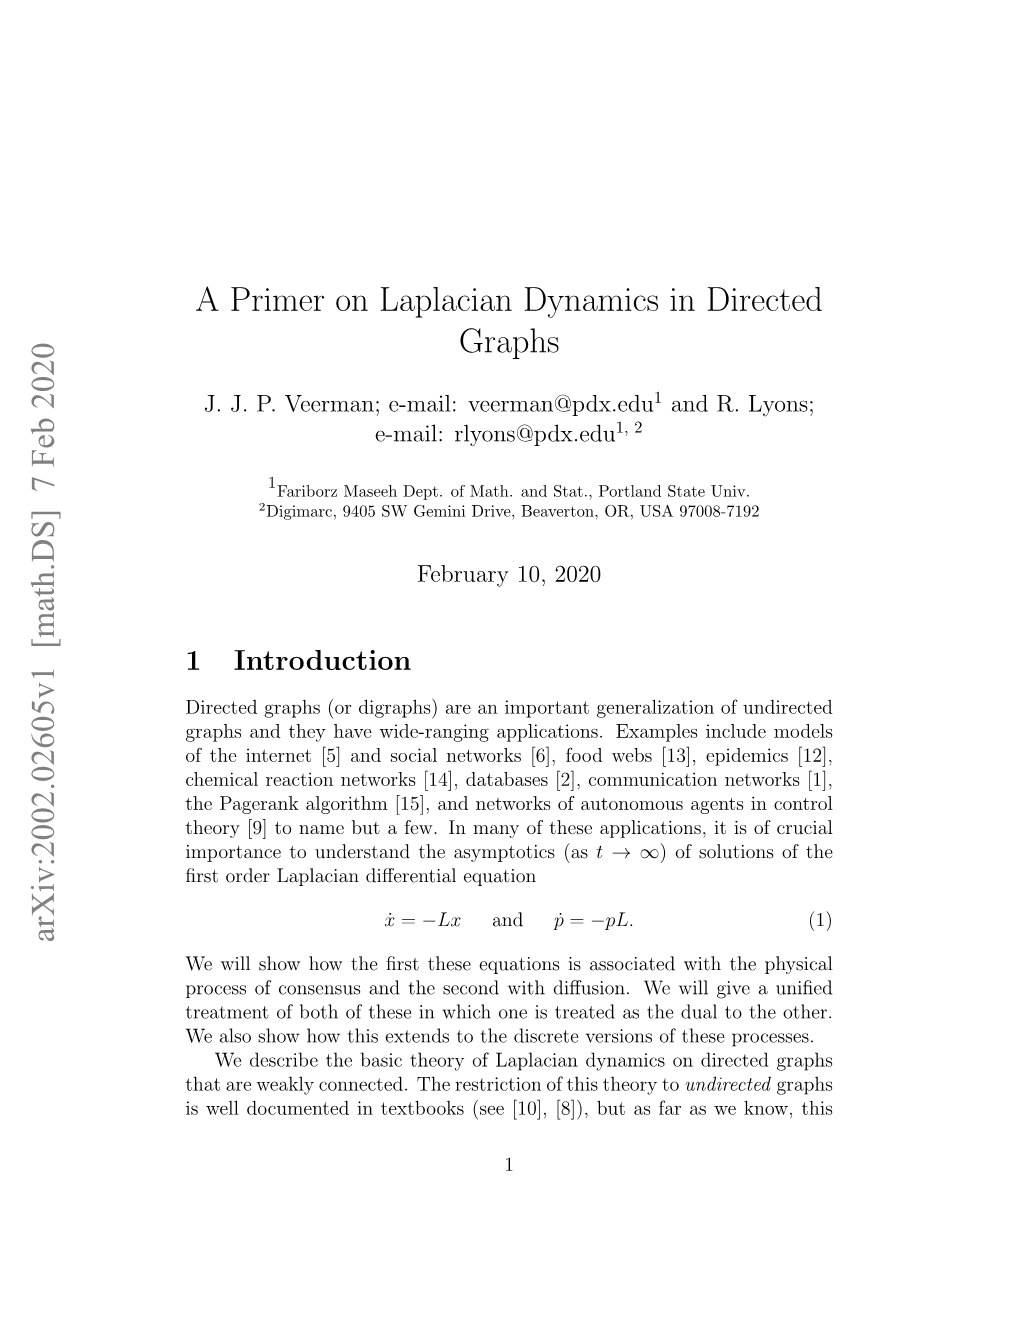 A Primer on Laplacian Dynamics in Directed Graphs Arxiv:2002.02605